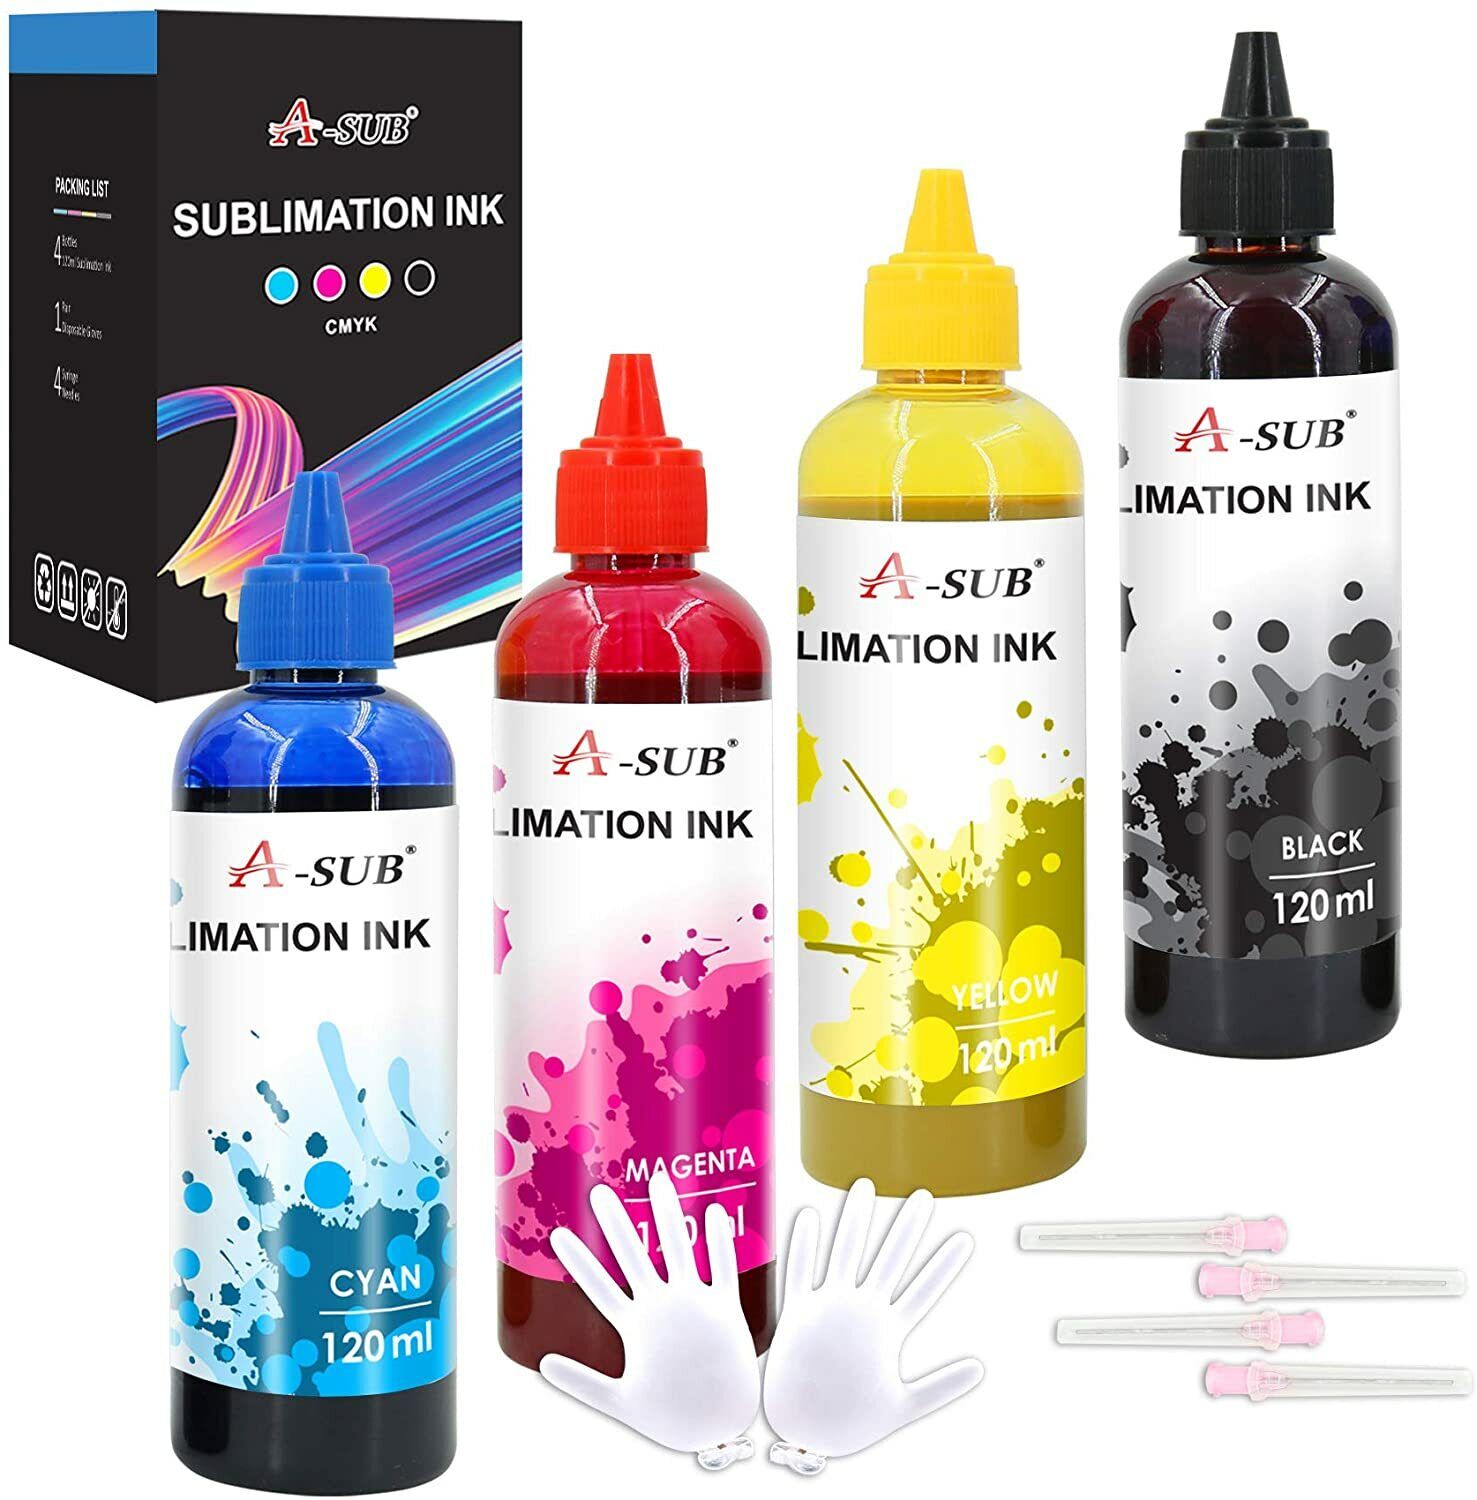 480ML A-SUB Sublimation Ink Refill for ET 2720 2760 15000 3720 2750 WF 2850 7210